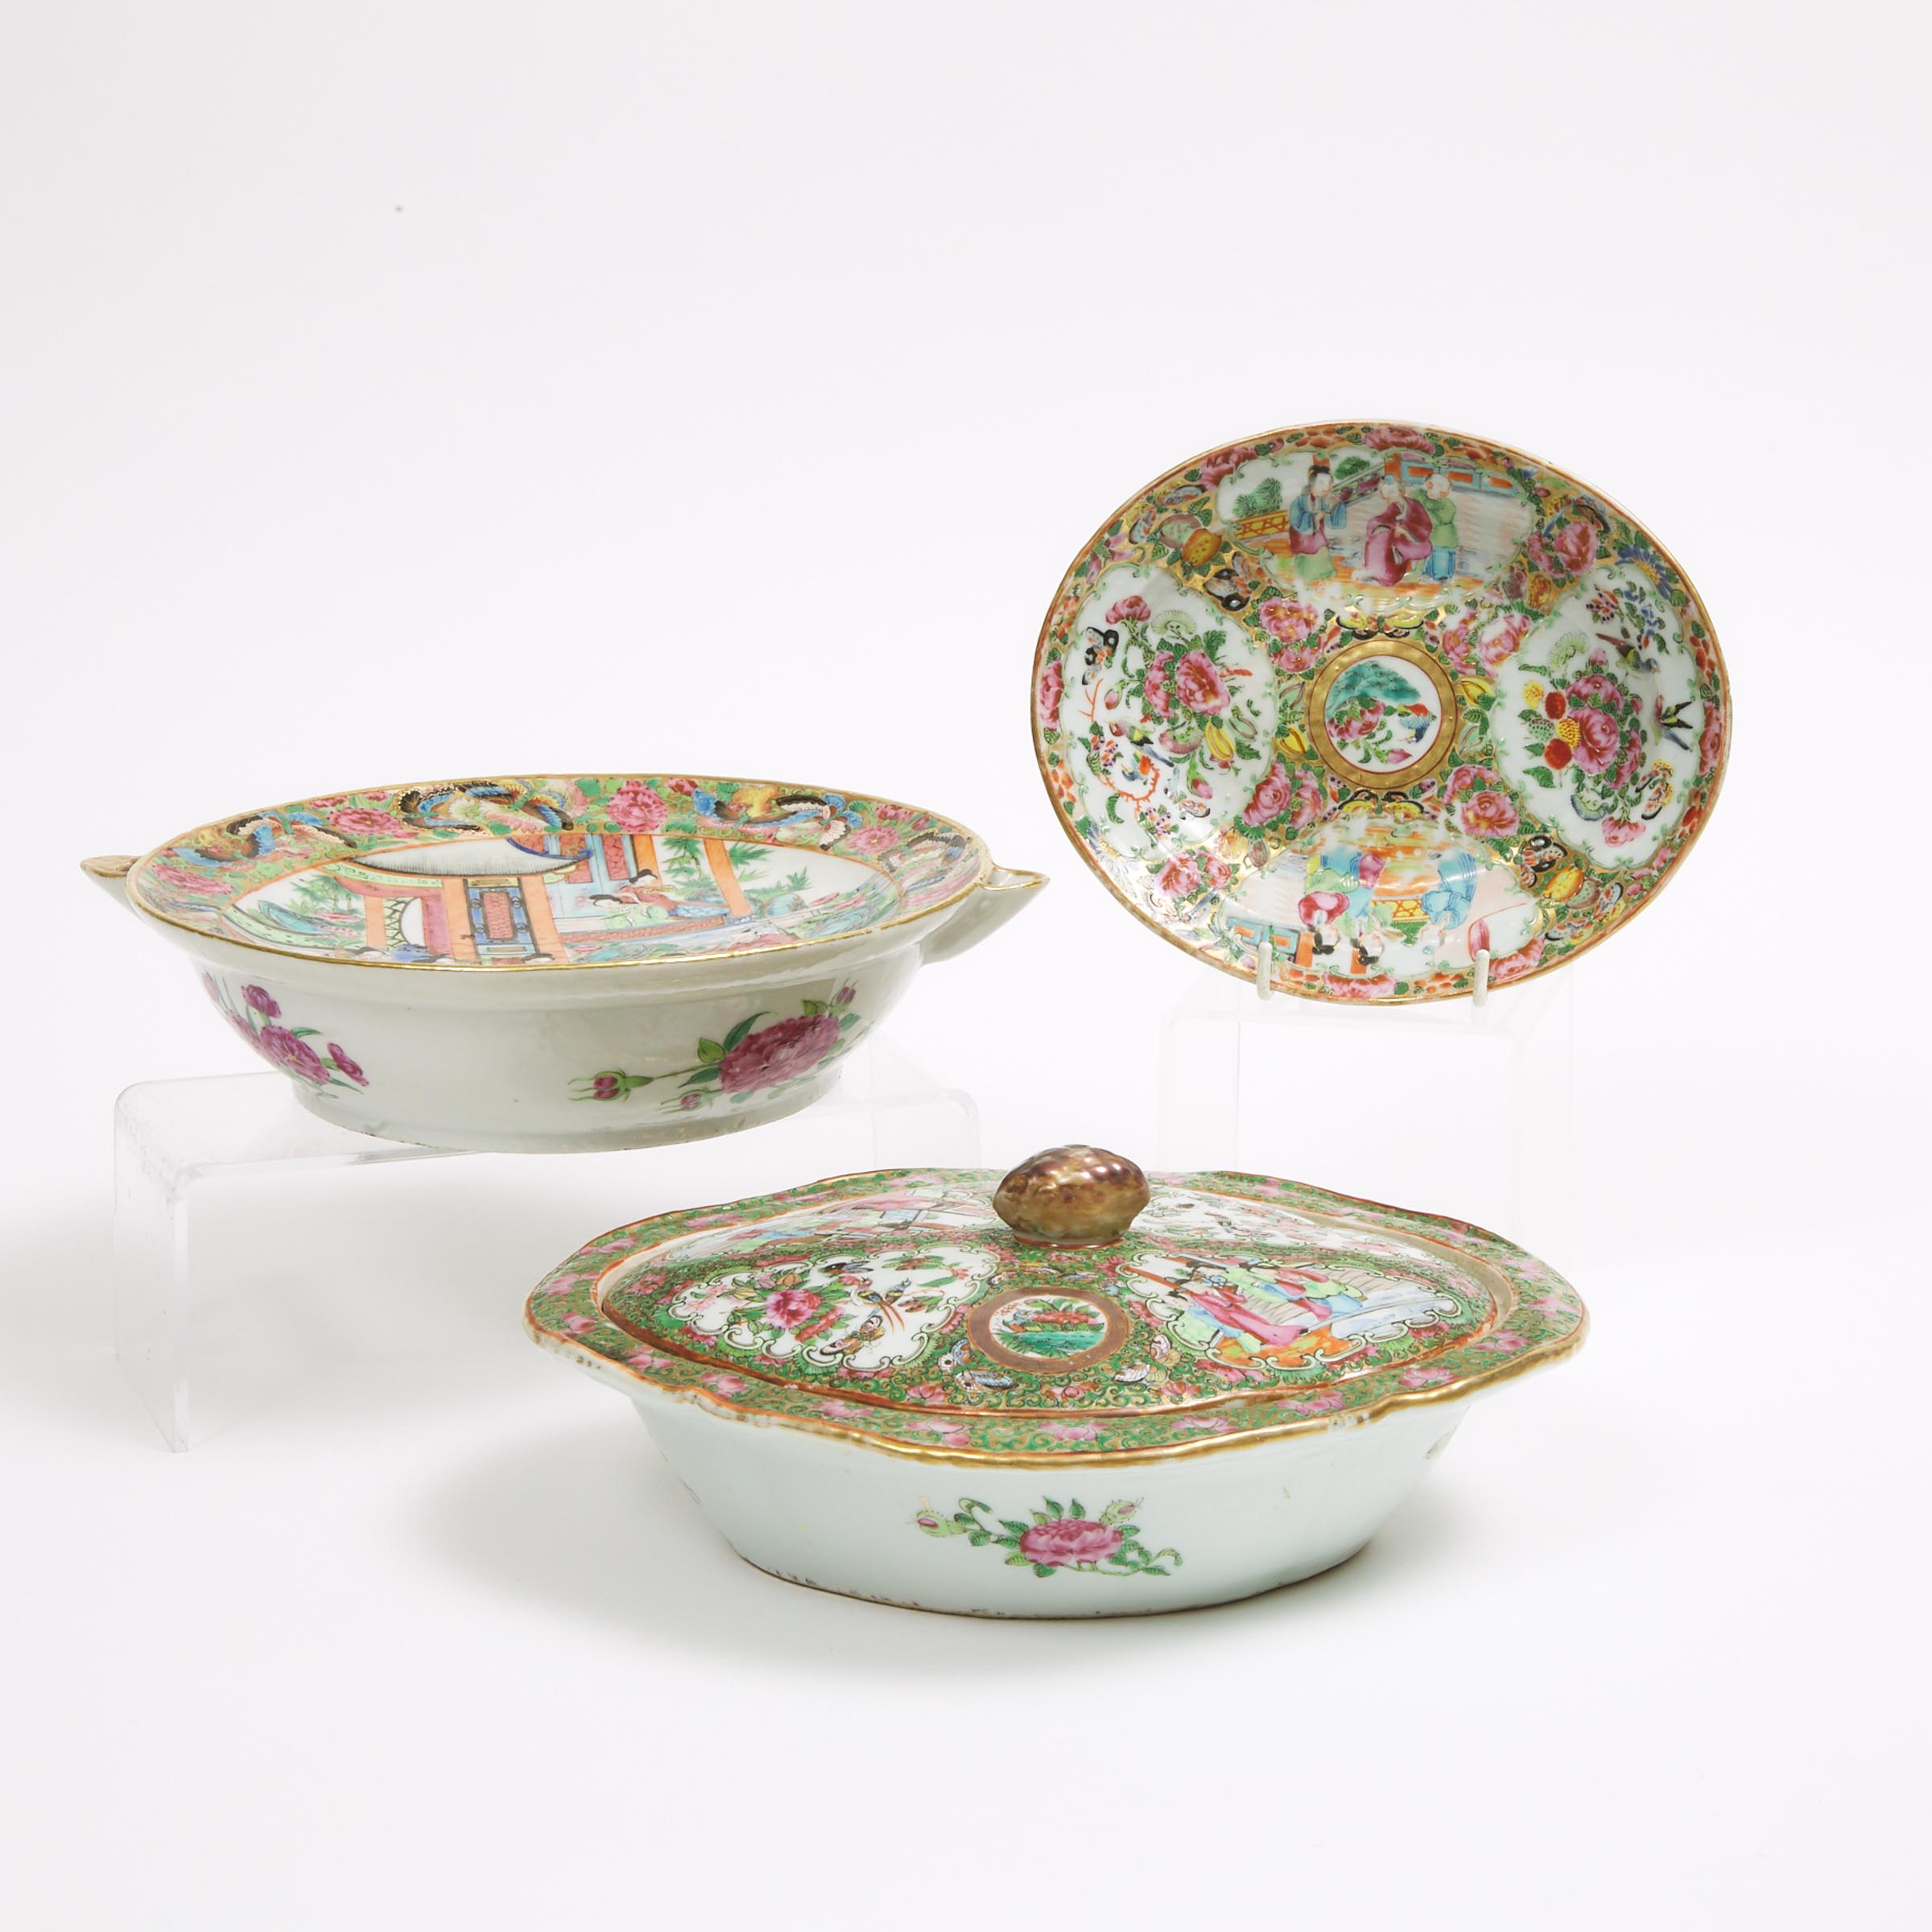 A Group of Three Canton Famille Rose Wares, 19th Century